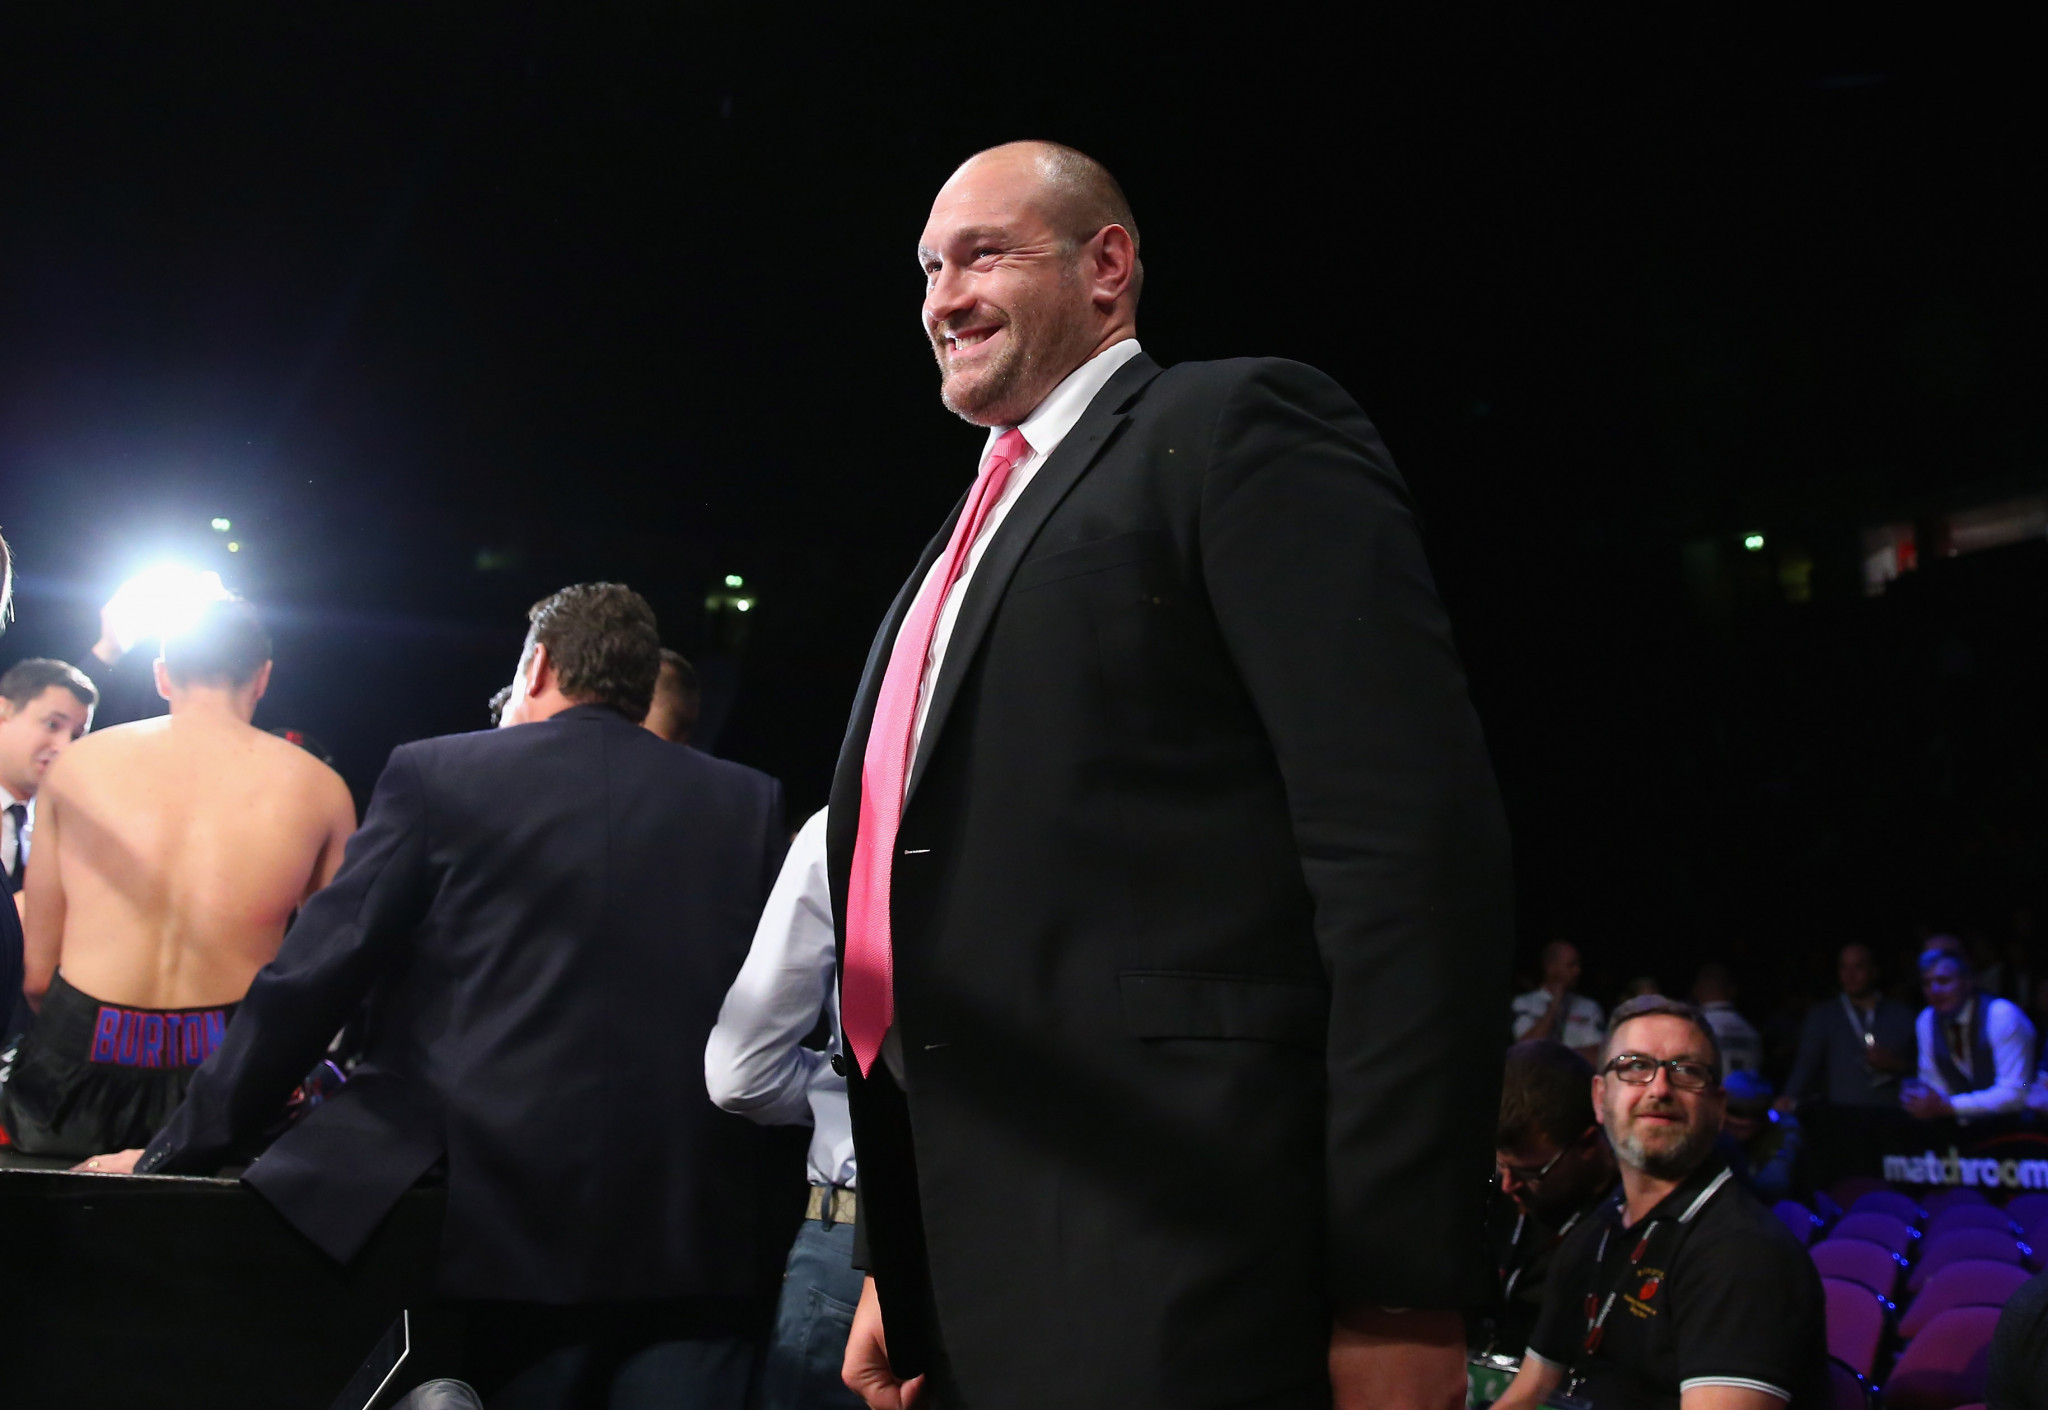 Will Tyson Fury return to the form which saw him crowned world heavyweight champion? ©Getty Images